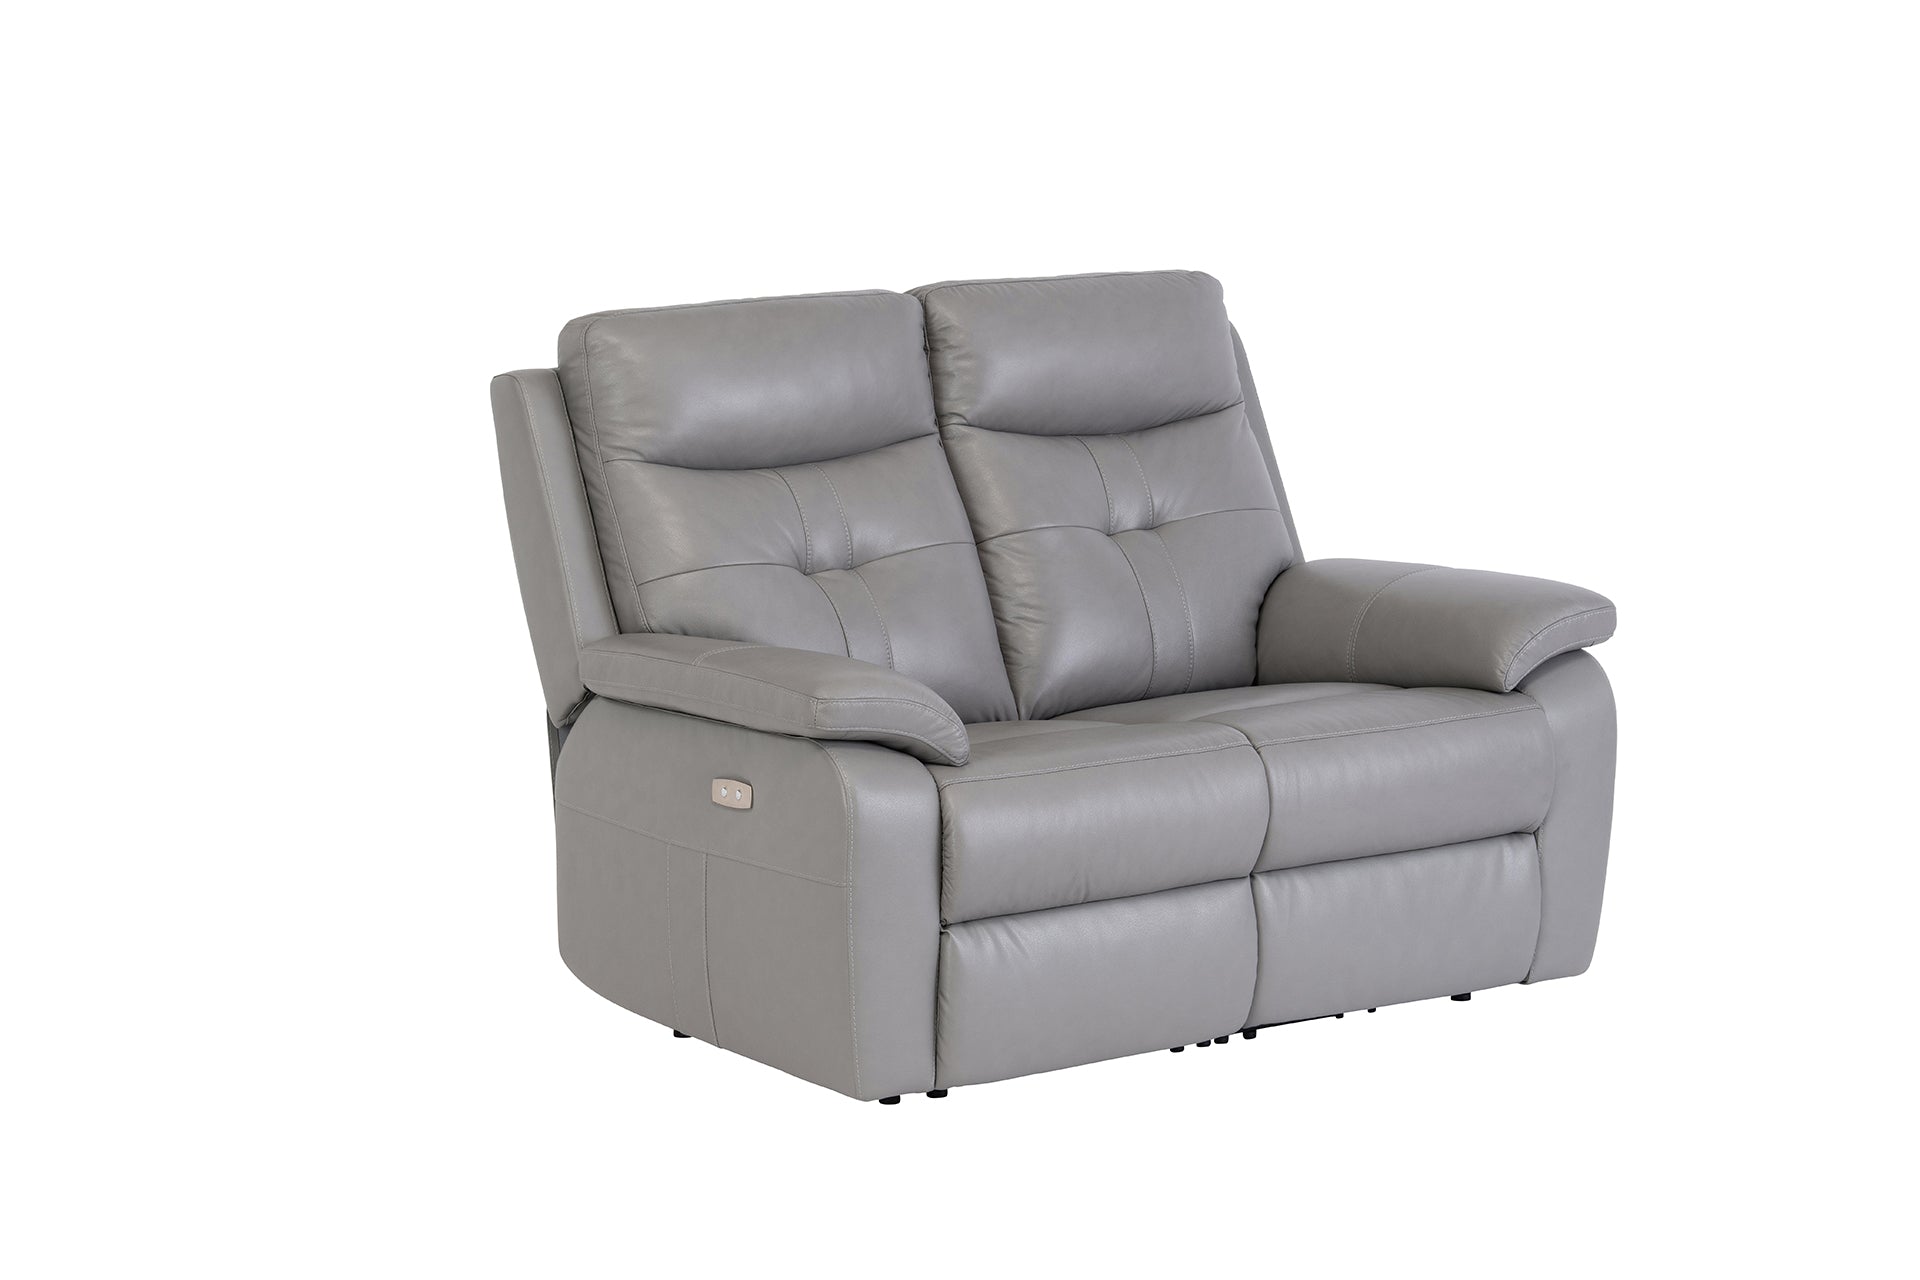 Sonia Leather Electric 2 Seater Recliner - Grey - USB Ports